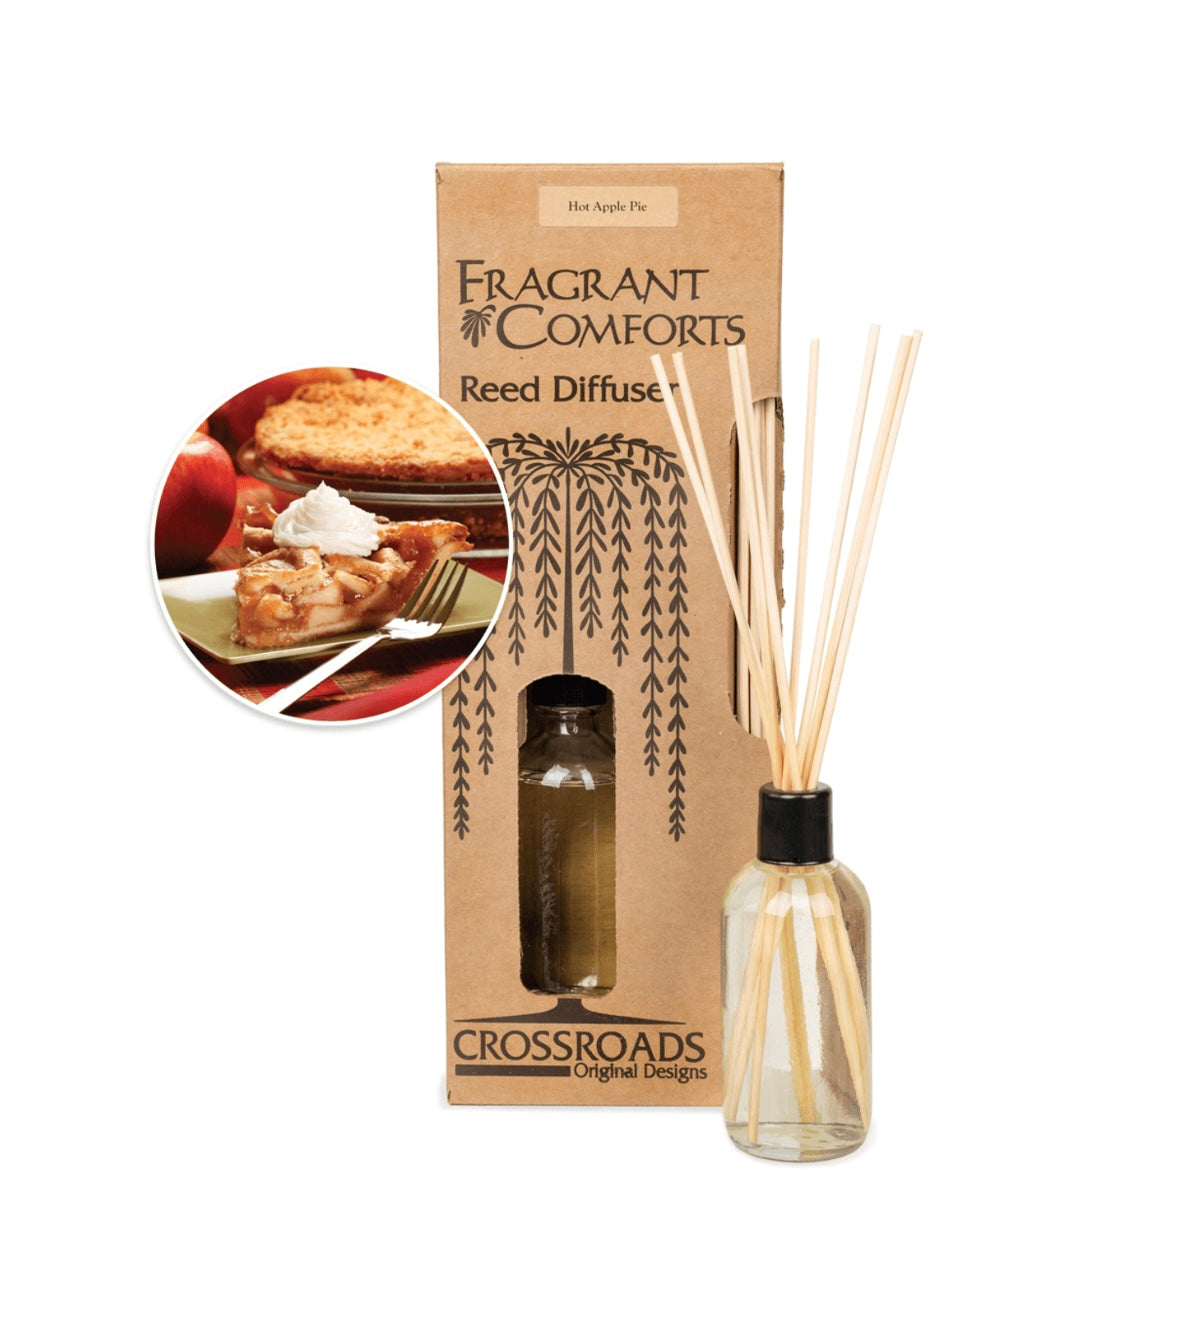 Hot Apple Pie Reed Diffuser